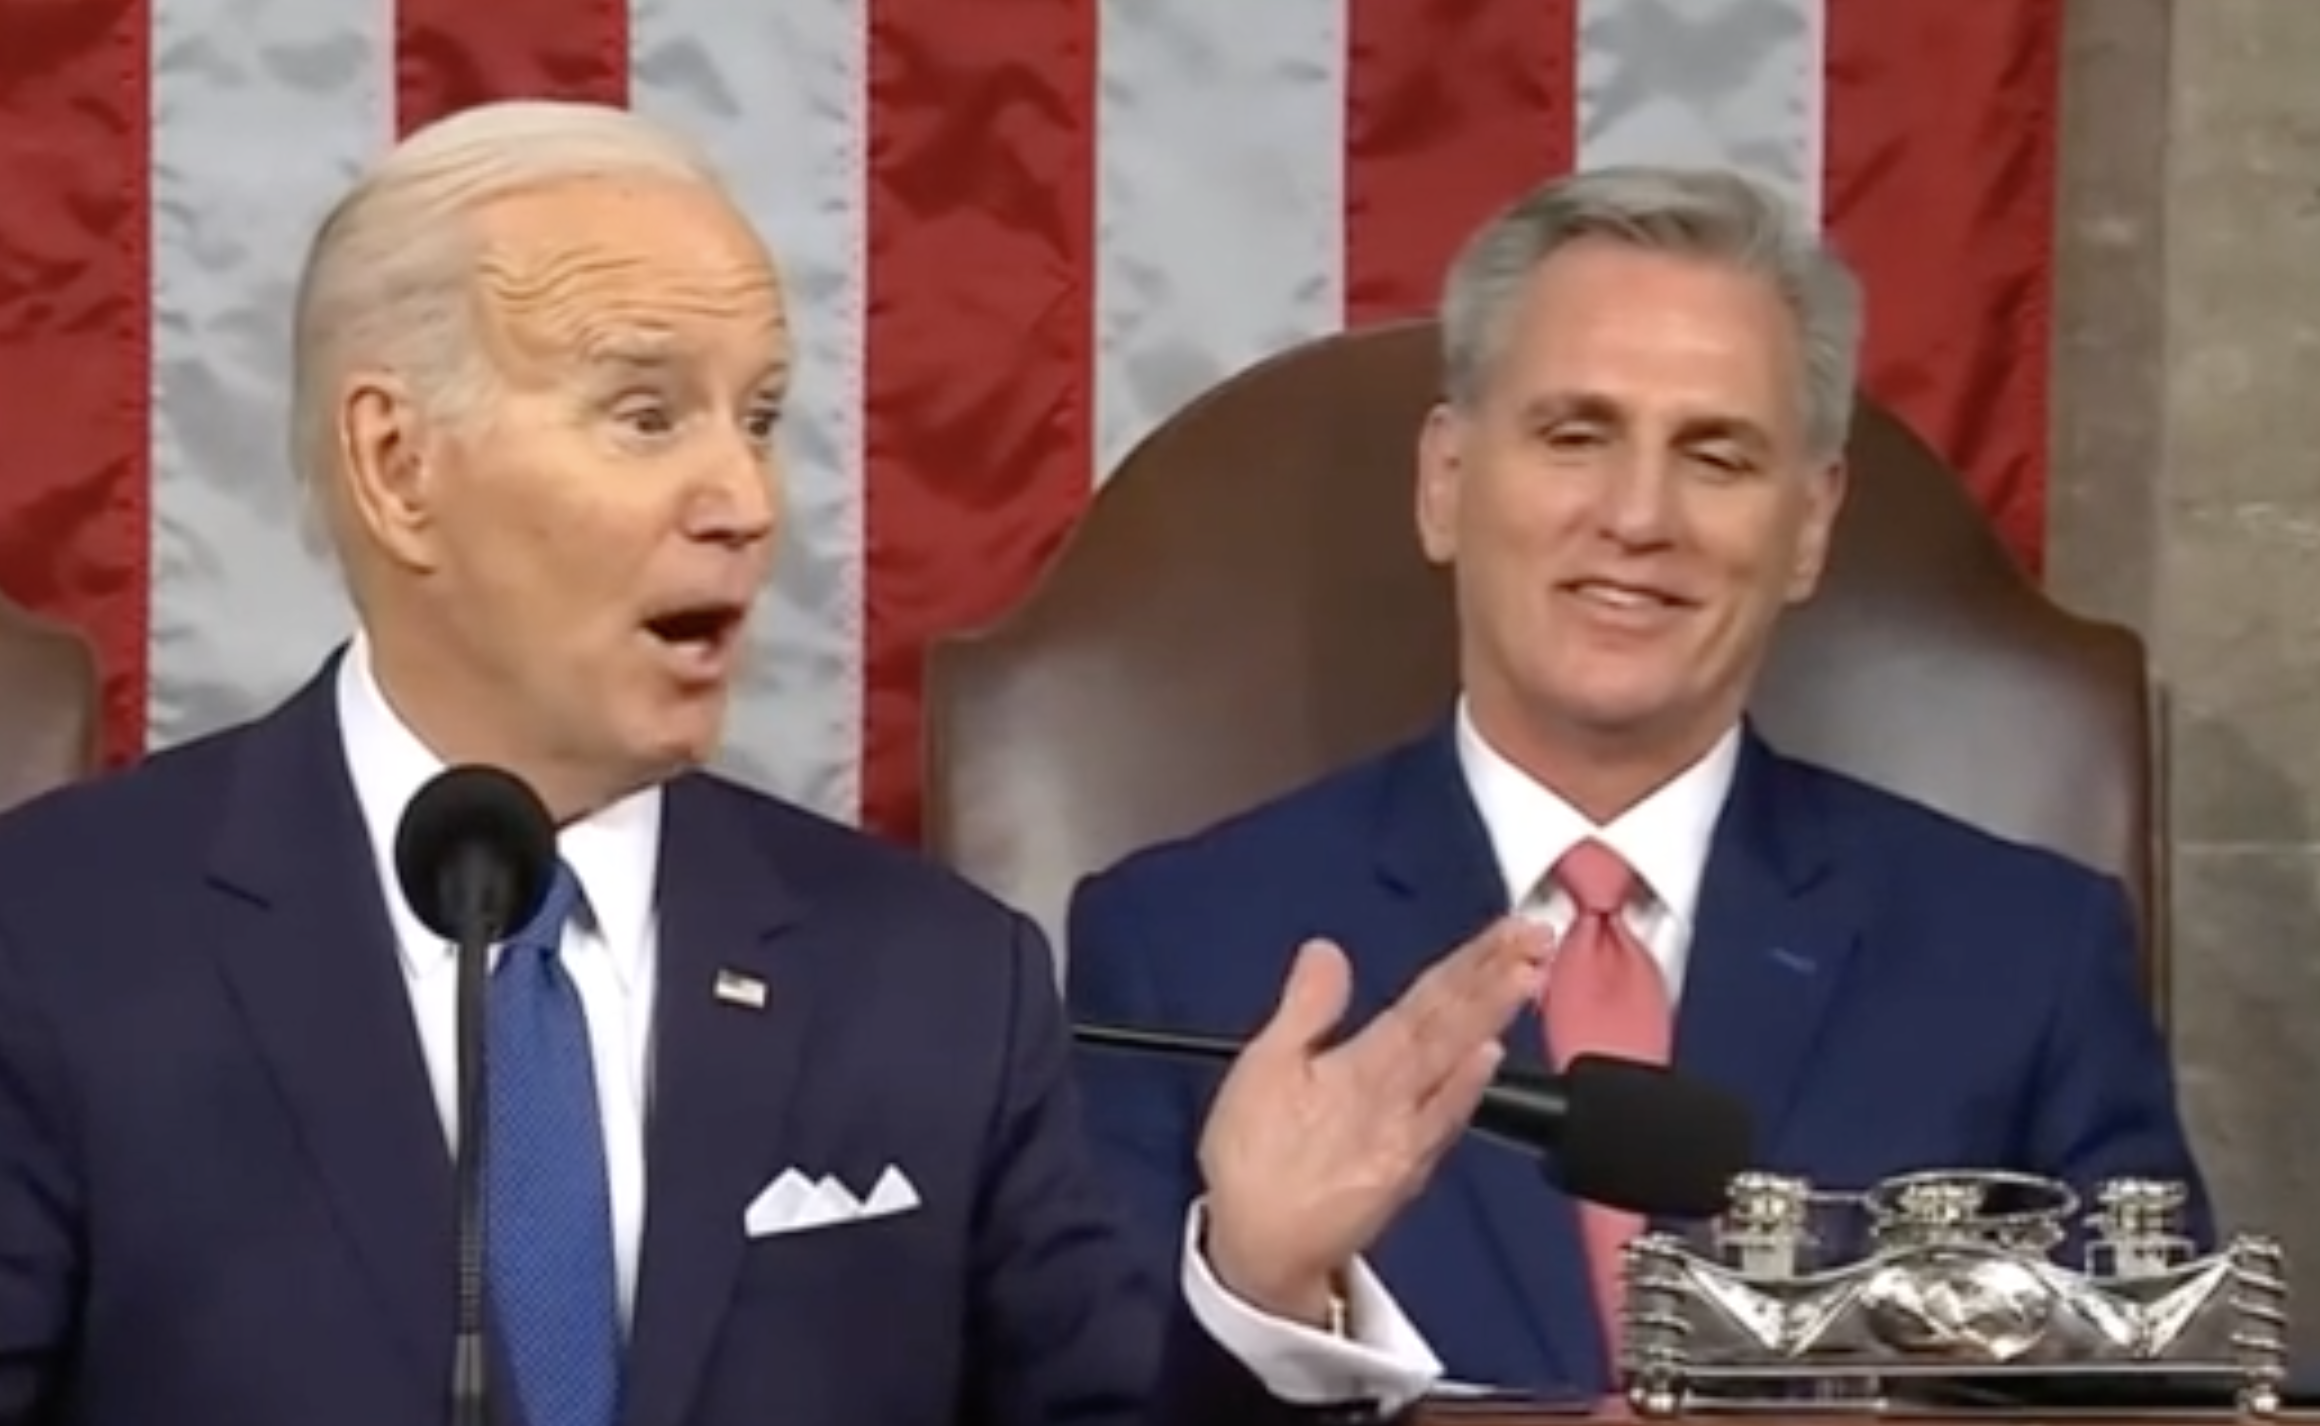 WATCH: Republicans ERUPT With Laugher When Biden Falsely Claims Fast Food Workers Need To Sign Non-Competes